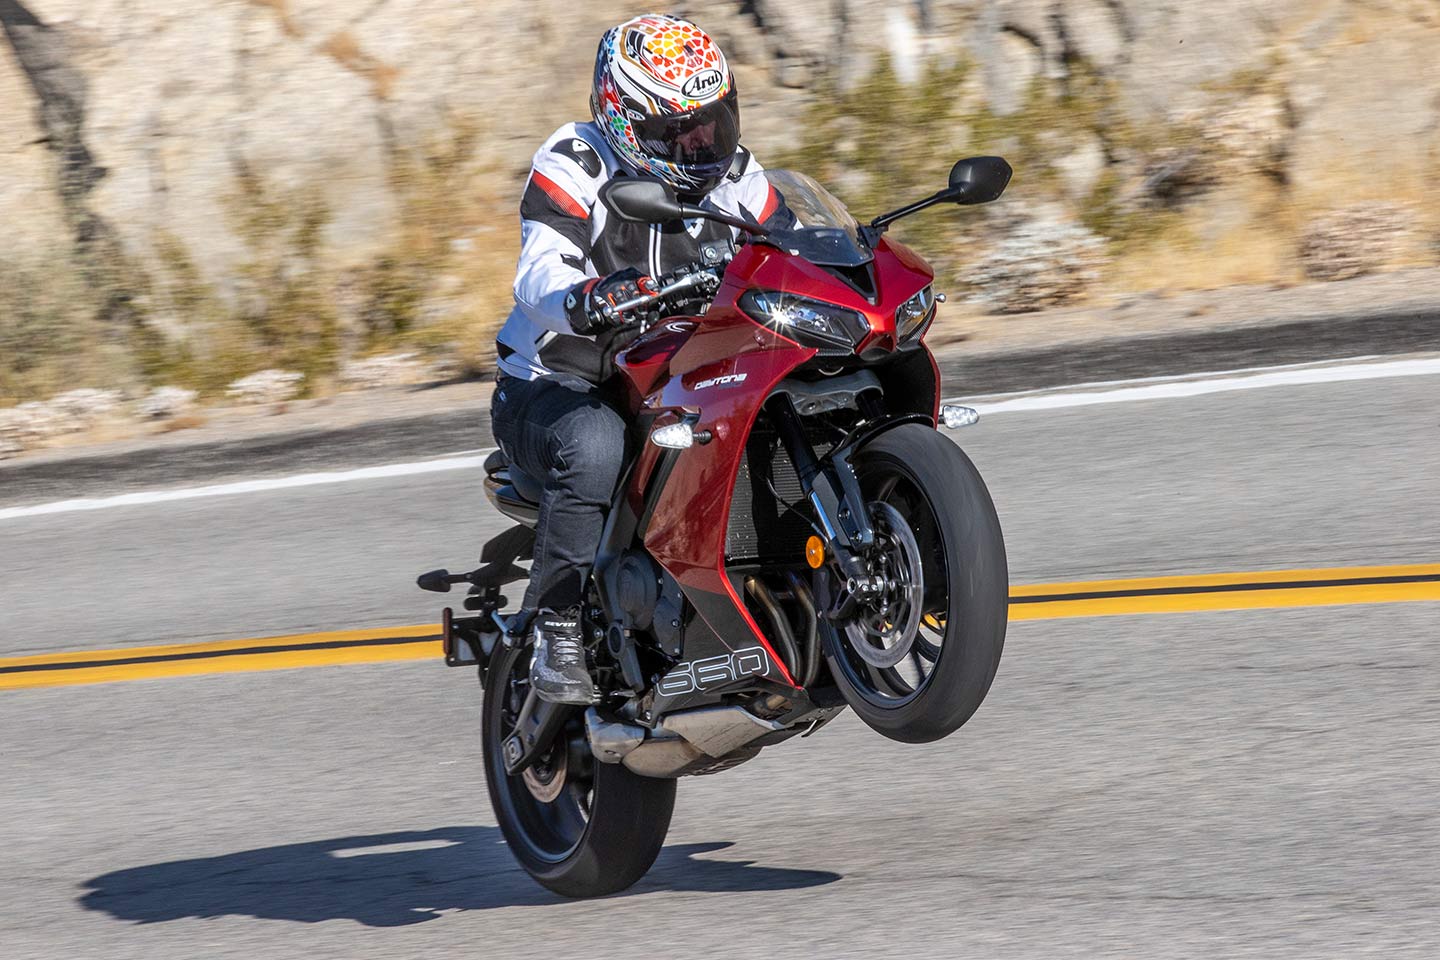 Top-end power isn’t an issue on the Triumph Daytona 660.